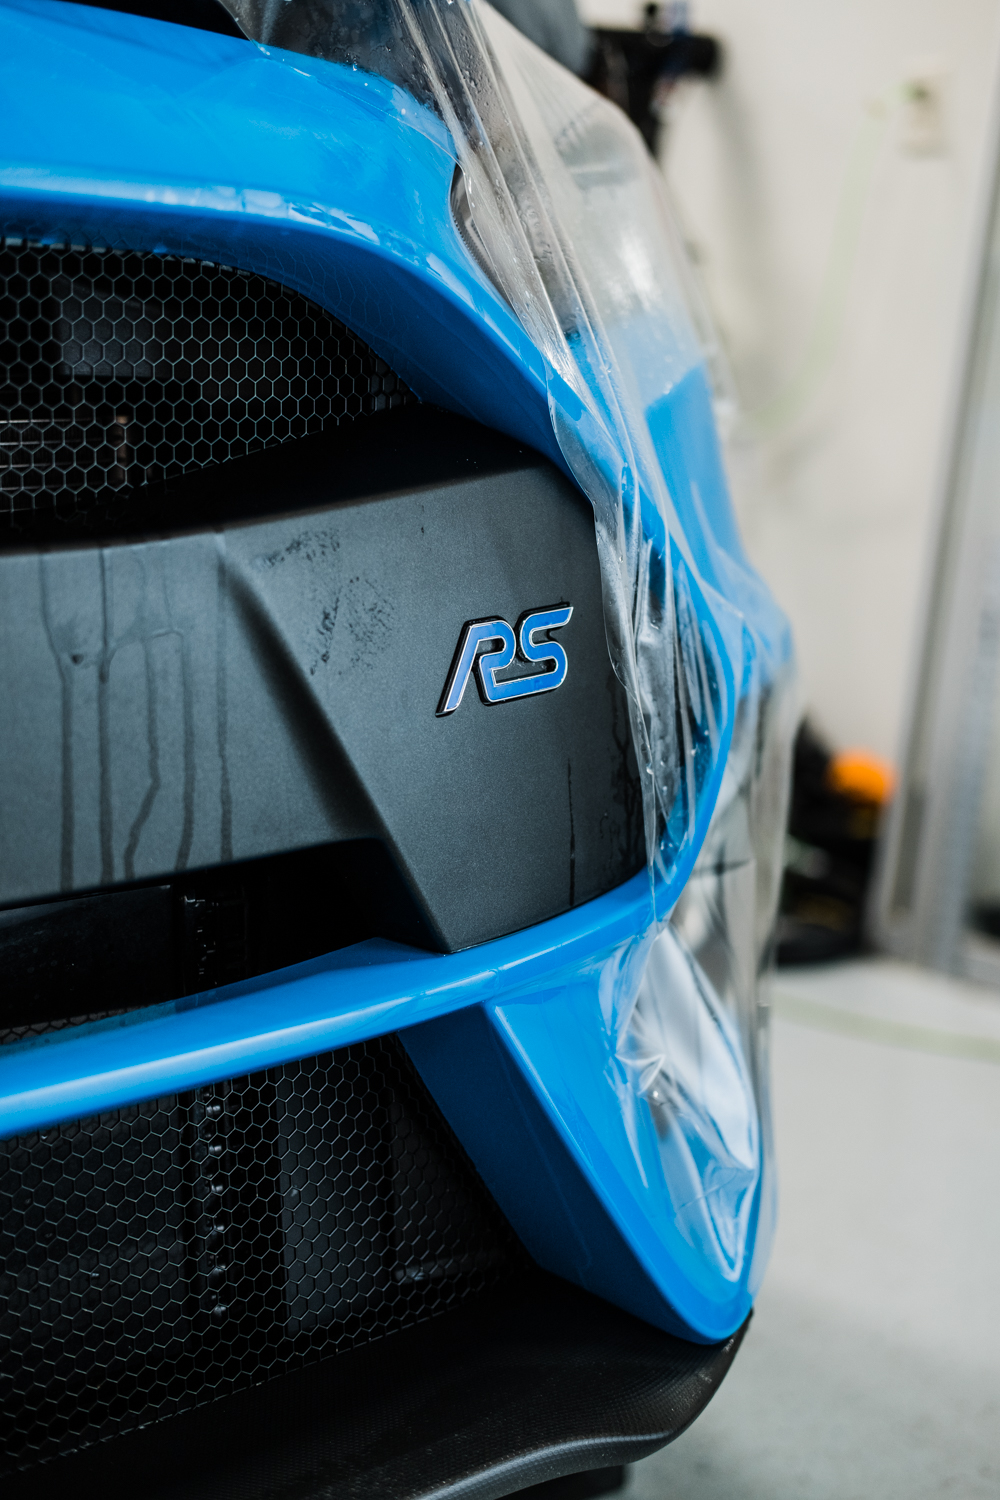 Ford Focus RS-XPEL Ultimate Paint Protection Film-Car Wash-Car Detailing-Paint Protection Film-Clear Bra-Ford Performance-112.jpg